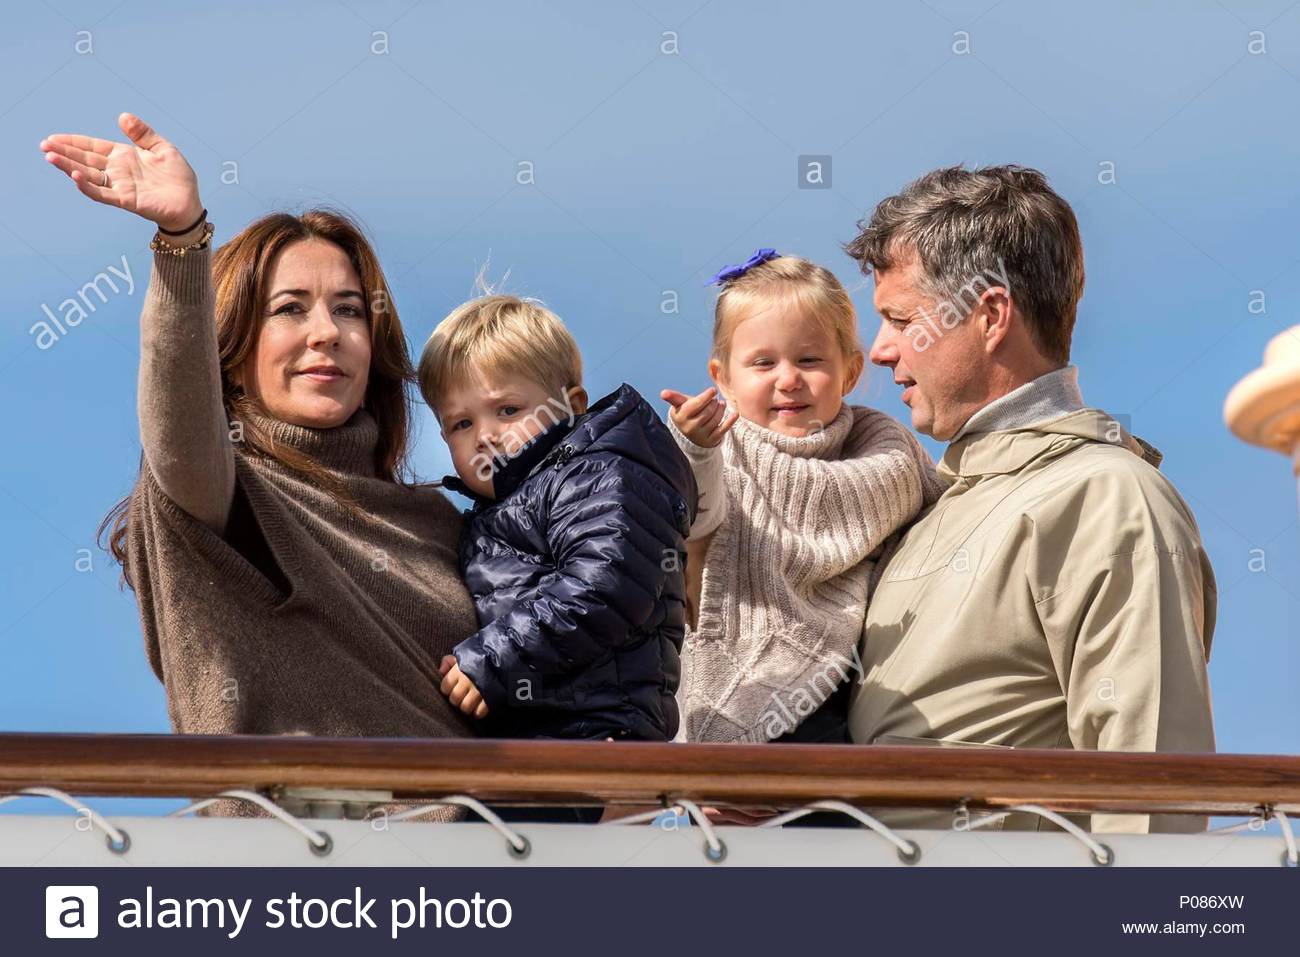 prince-vincent-crown-princess-mary-princess-josephine-and-crown-prince-frederik-no-web-until-august-14-2014-the-crown-prince-couples-official-visit-to-greenland-with-their-four-children-from-august-1-to-august-8-2014-hrh-crown-prince-frederik-hrh-crown-princess-mary-hrh-prince-christian-hrh-princess-isabella-hrh-princess-josephine-and-hrh-prince-vincent-are-visiting-paamiut-monday-4th-august-arrival-with-royal-yacht-dannebrog-and-welcome-in-the-habour-visit-at-family-centre-and-prevention-office-tiloq-they-tries-pedalos-at-airport-island-and-the-children-runs-and-jumps-in-P086XW.jpg